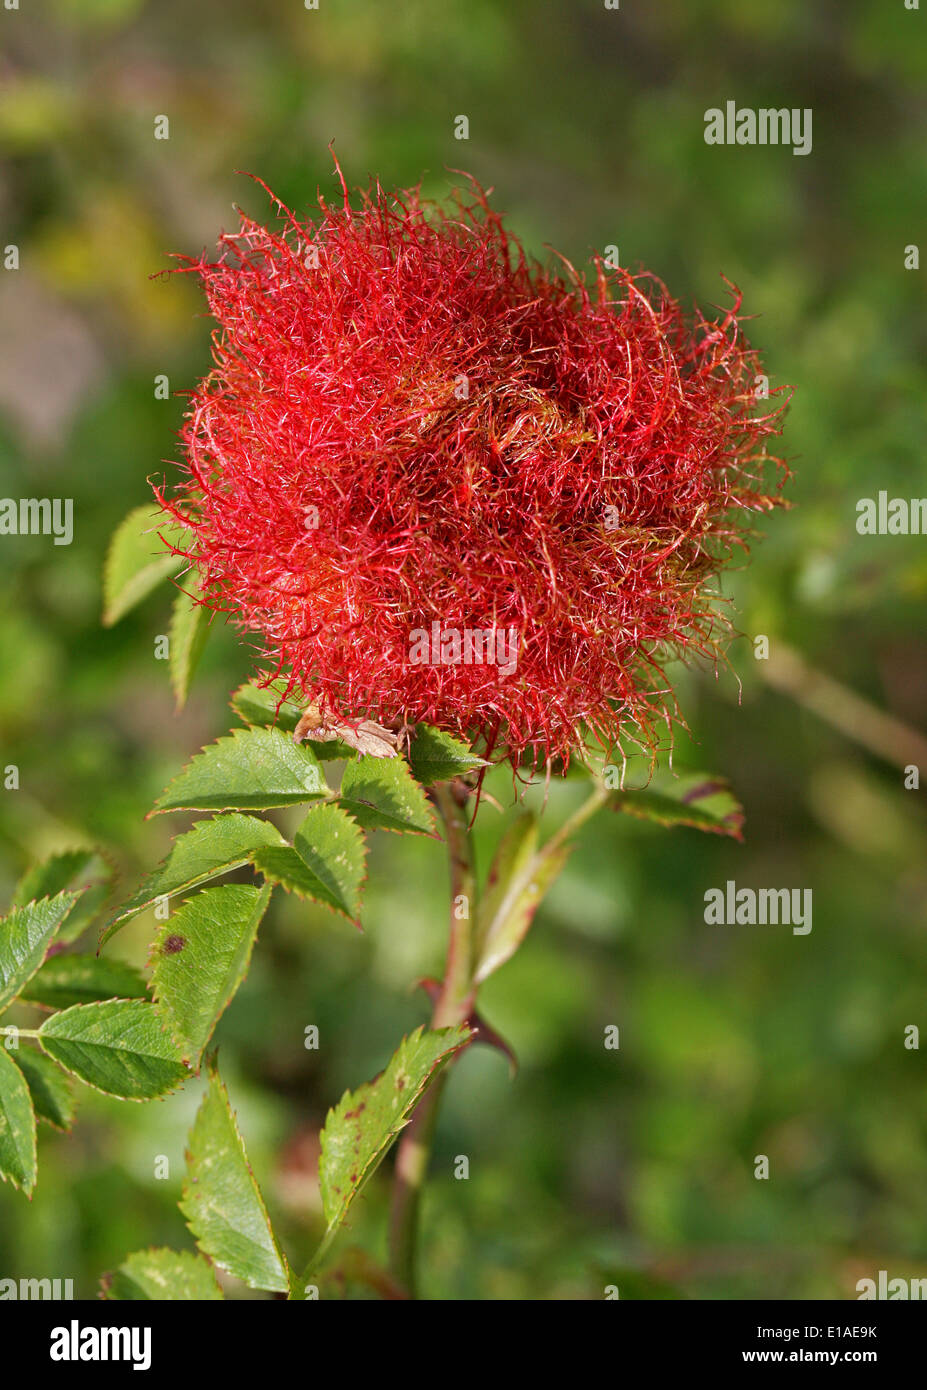 Bedeguar Gall on Dog Rose Caused by the Parasitic Mossy Rose Gall Wasp, Diplolepis rosae, Cynipoidea, Hymenoptera. Stock Photo